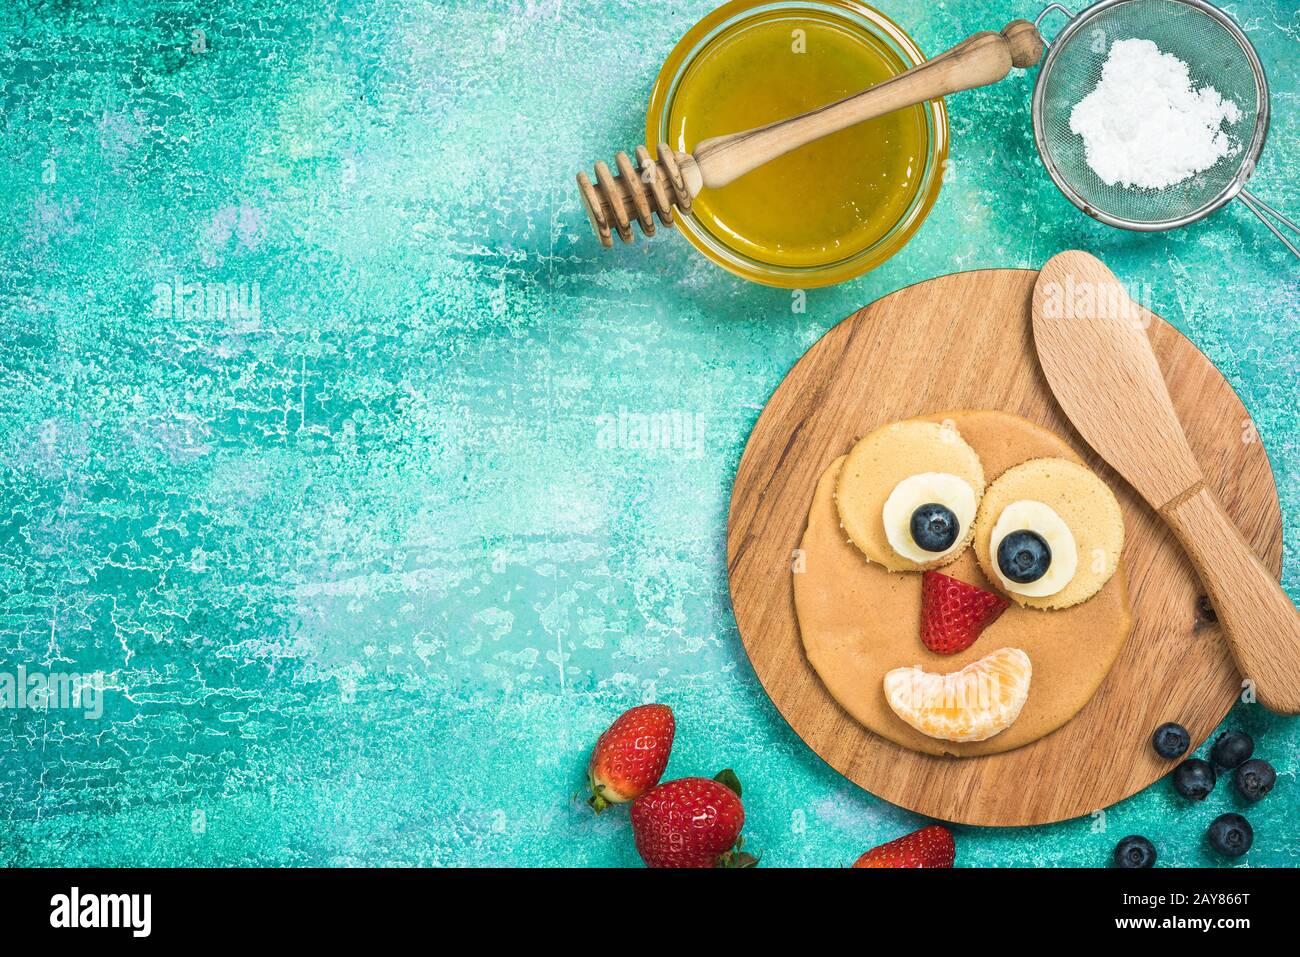 Making perfect pancakes for kids on Shrove Tuesday Stock Photo